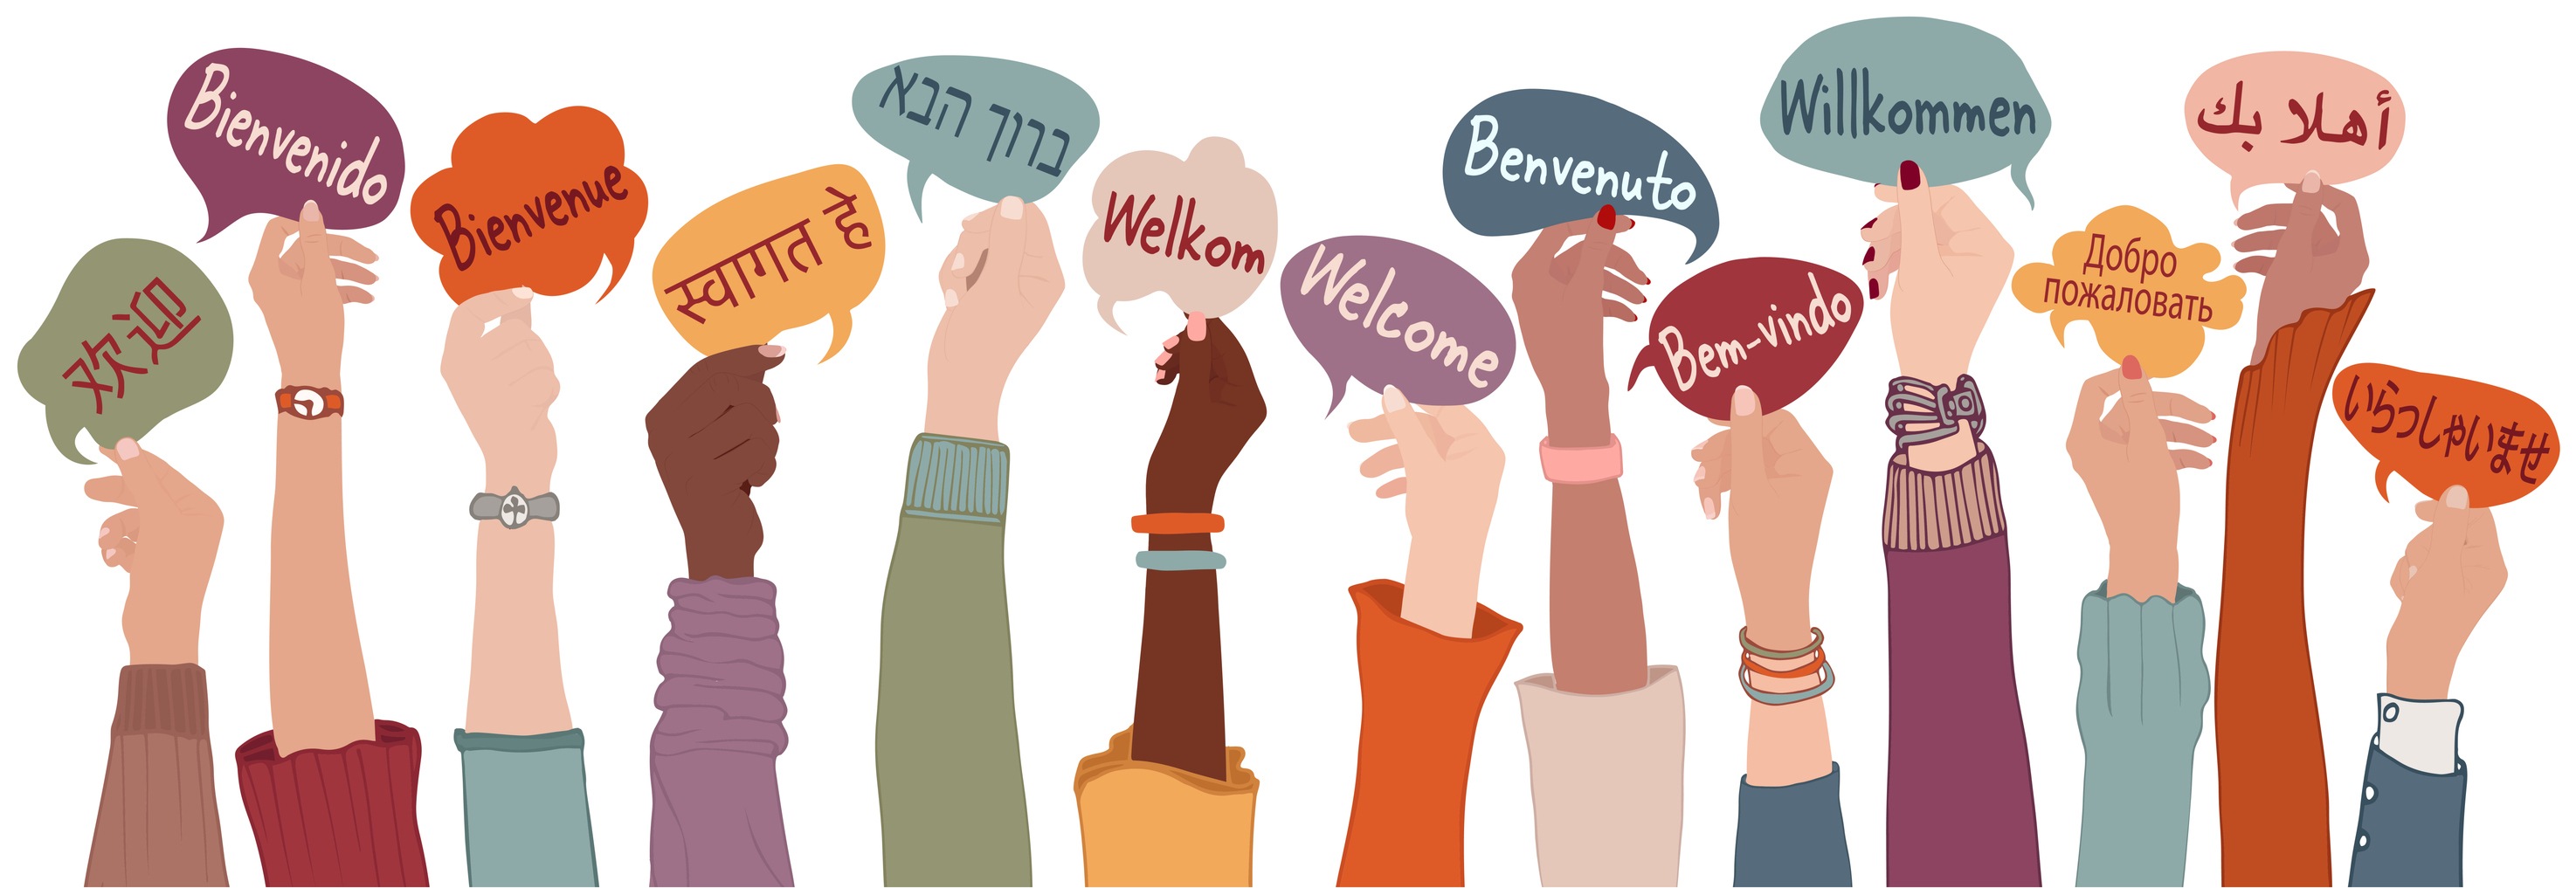 Illustration of hands holding "welcome" signs in different languages